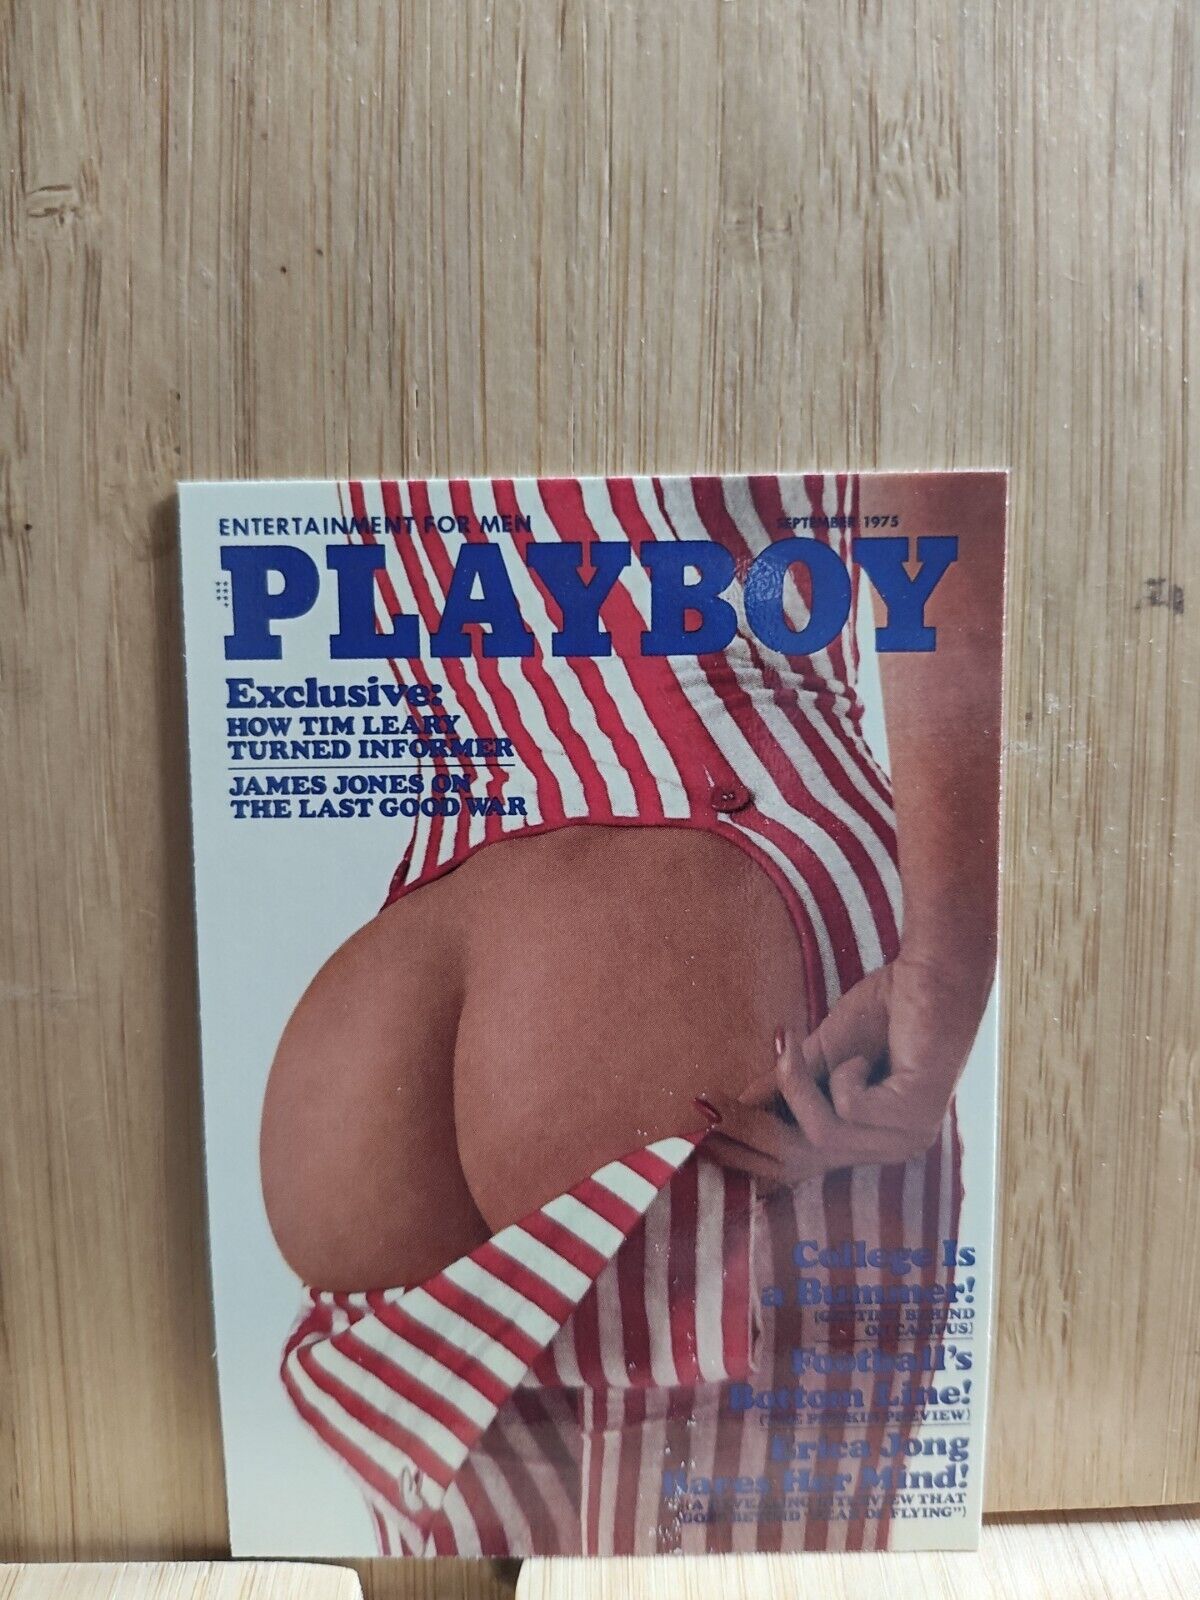 PLAYBOY 40 YEAR ANNIVERSARY 🏆1997 #64 SEPTEMBER 1975 ISSUE Card🏆